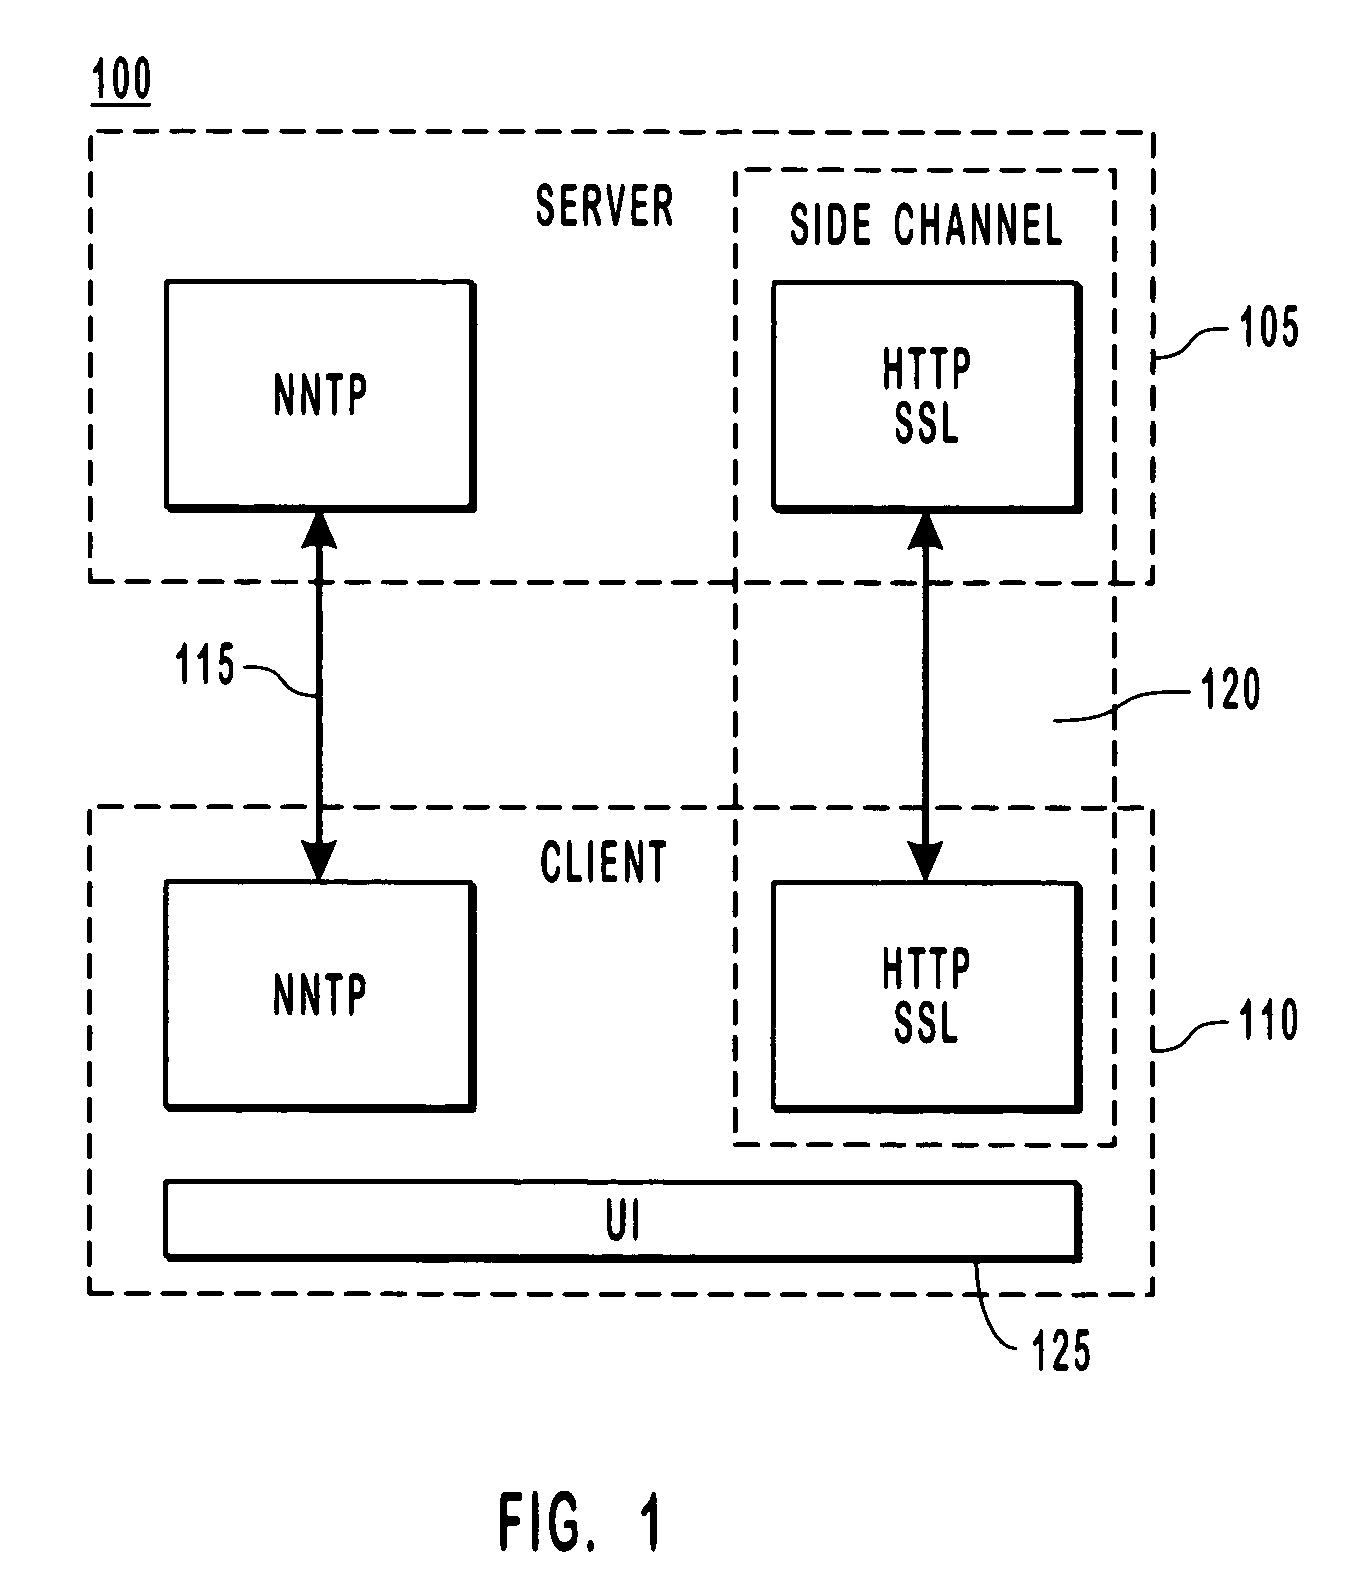 Network side channel for a message board